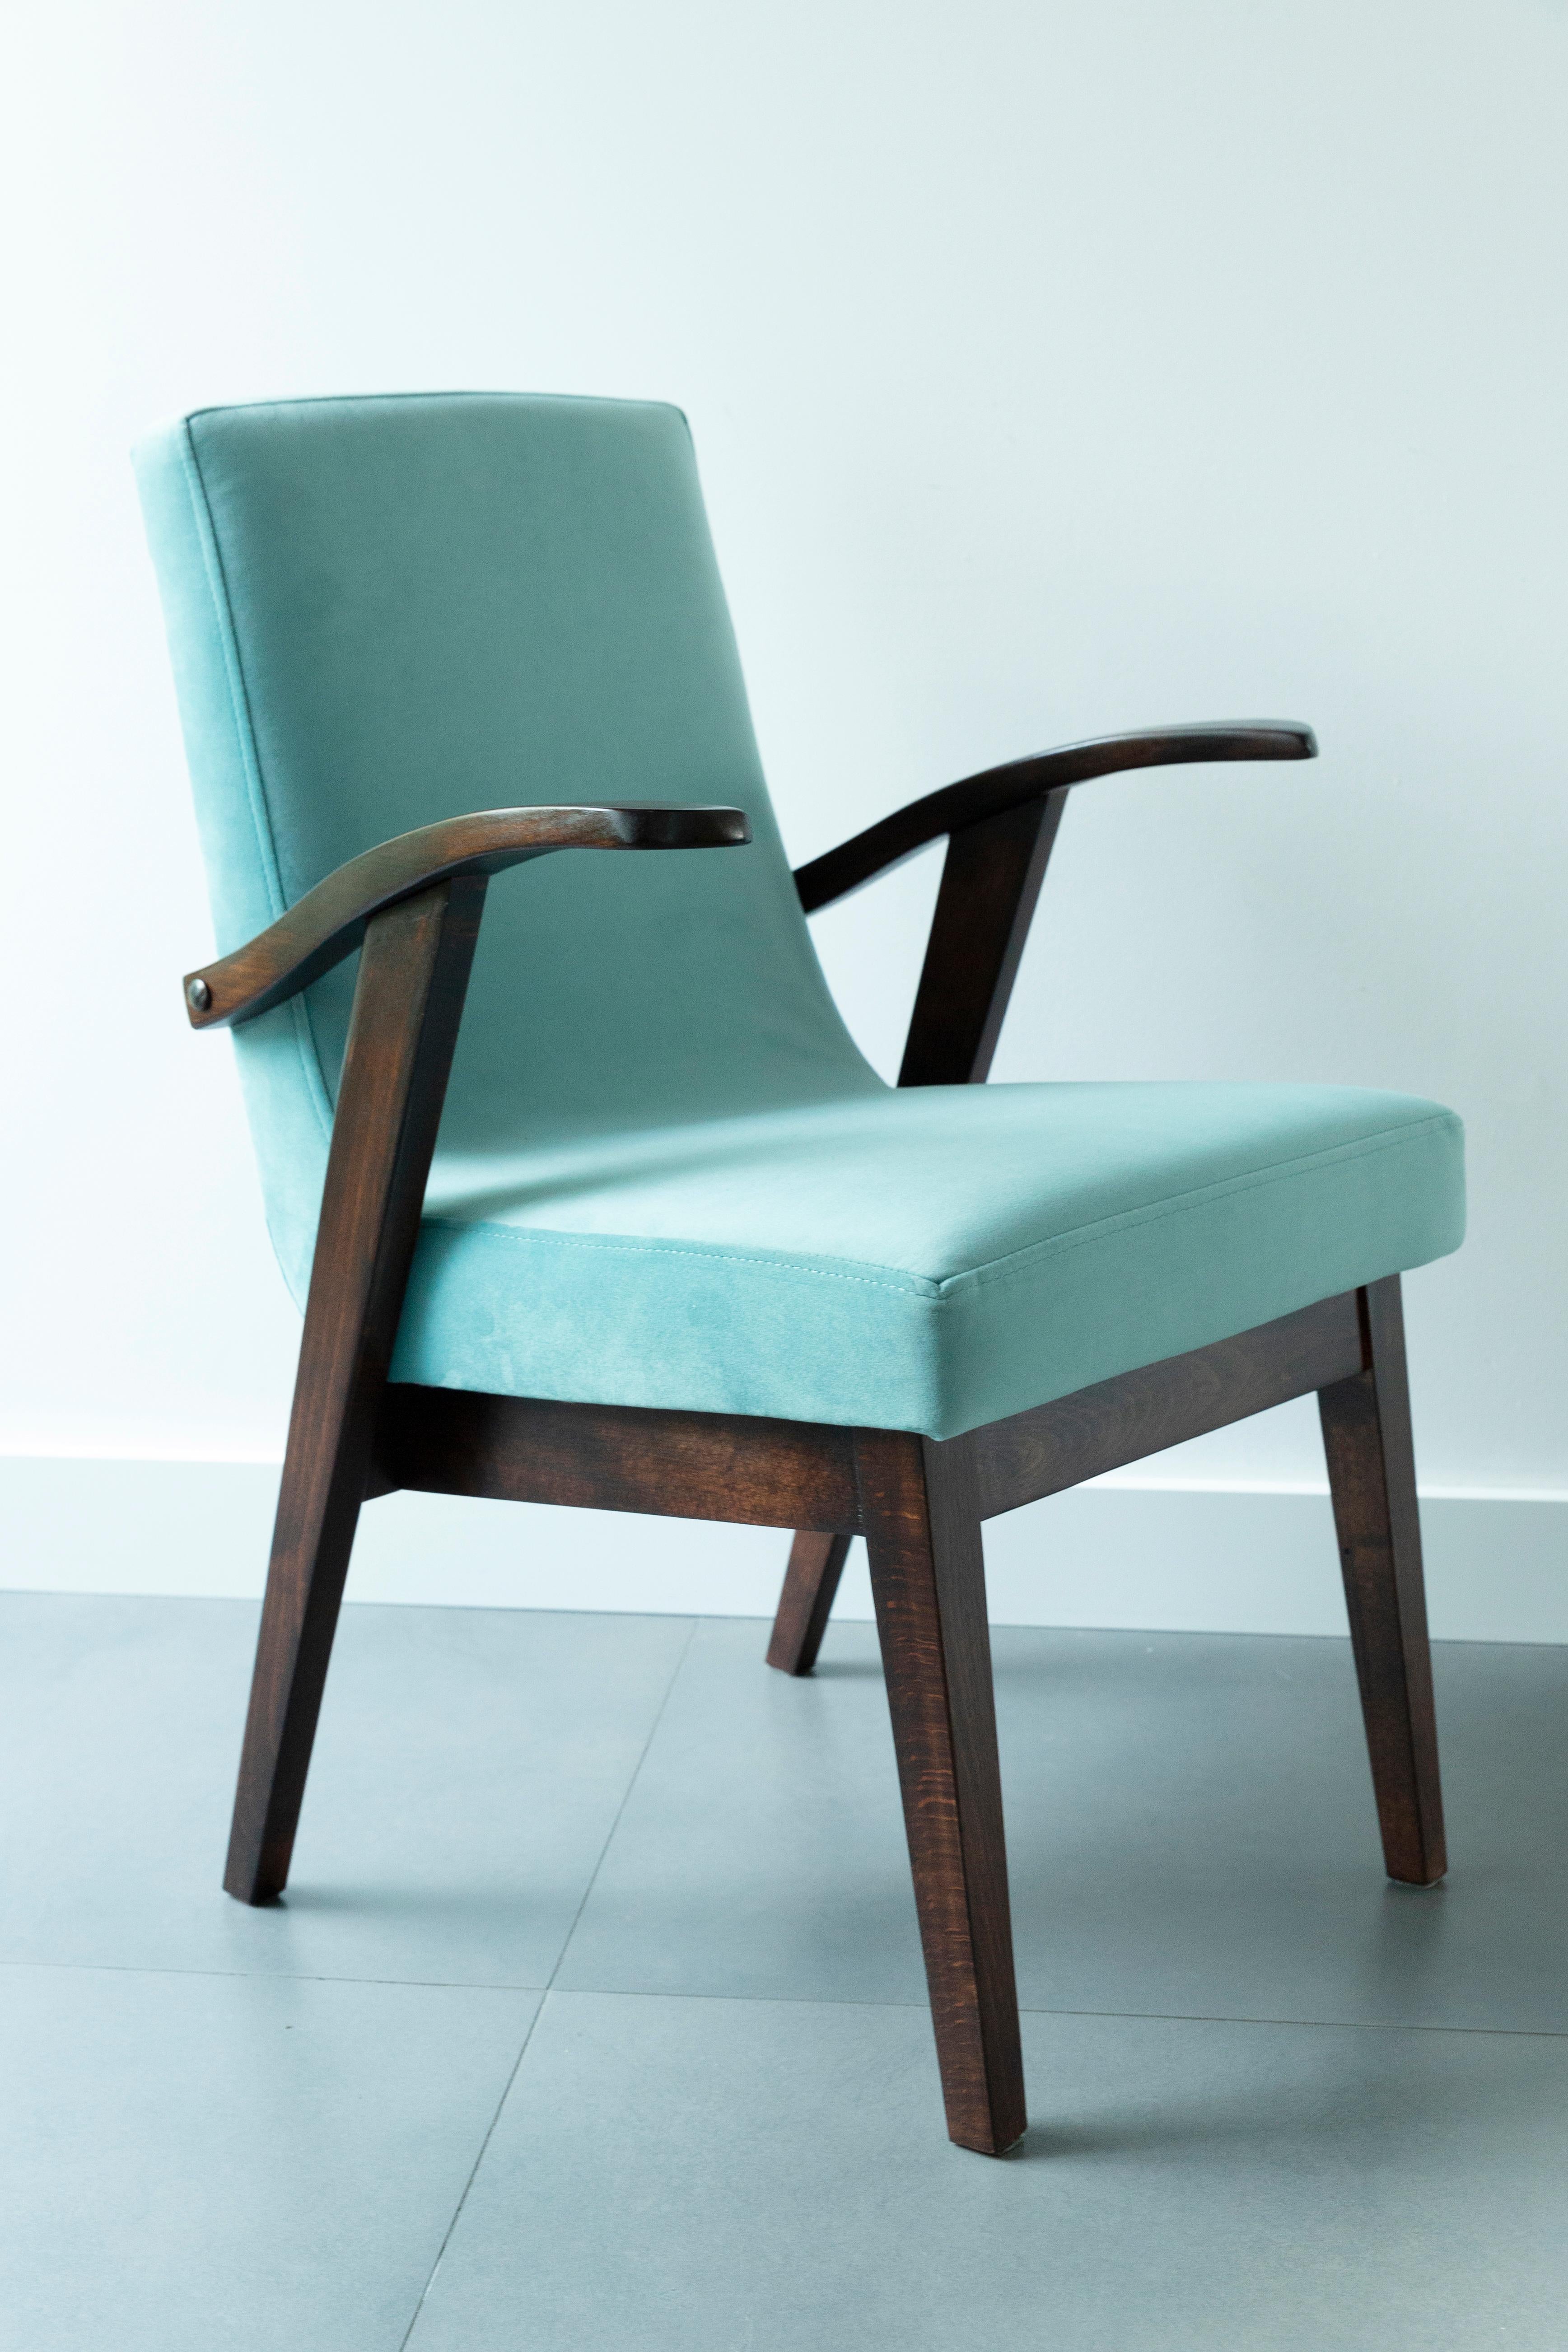 Armchair designed by Mieczyslaw Puchala. Dark brown wood combined with a mint green beautiful velvet gives it elegance and nobility. The chair has undergone a full carpentry and upholstery renovation. The wood is in excellent condition after full